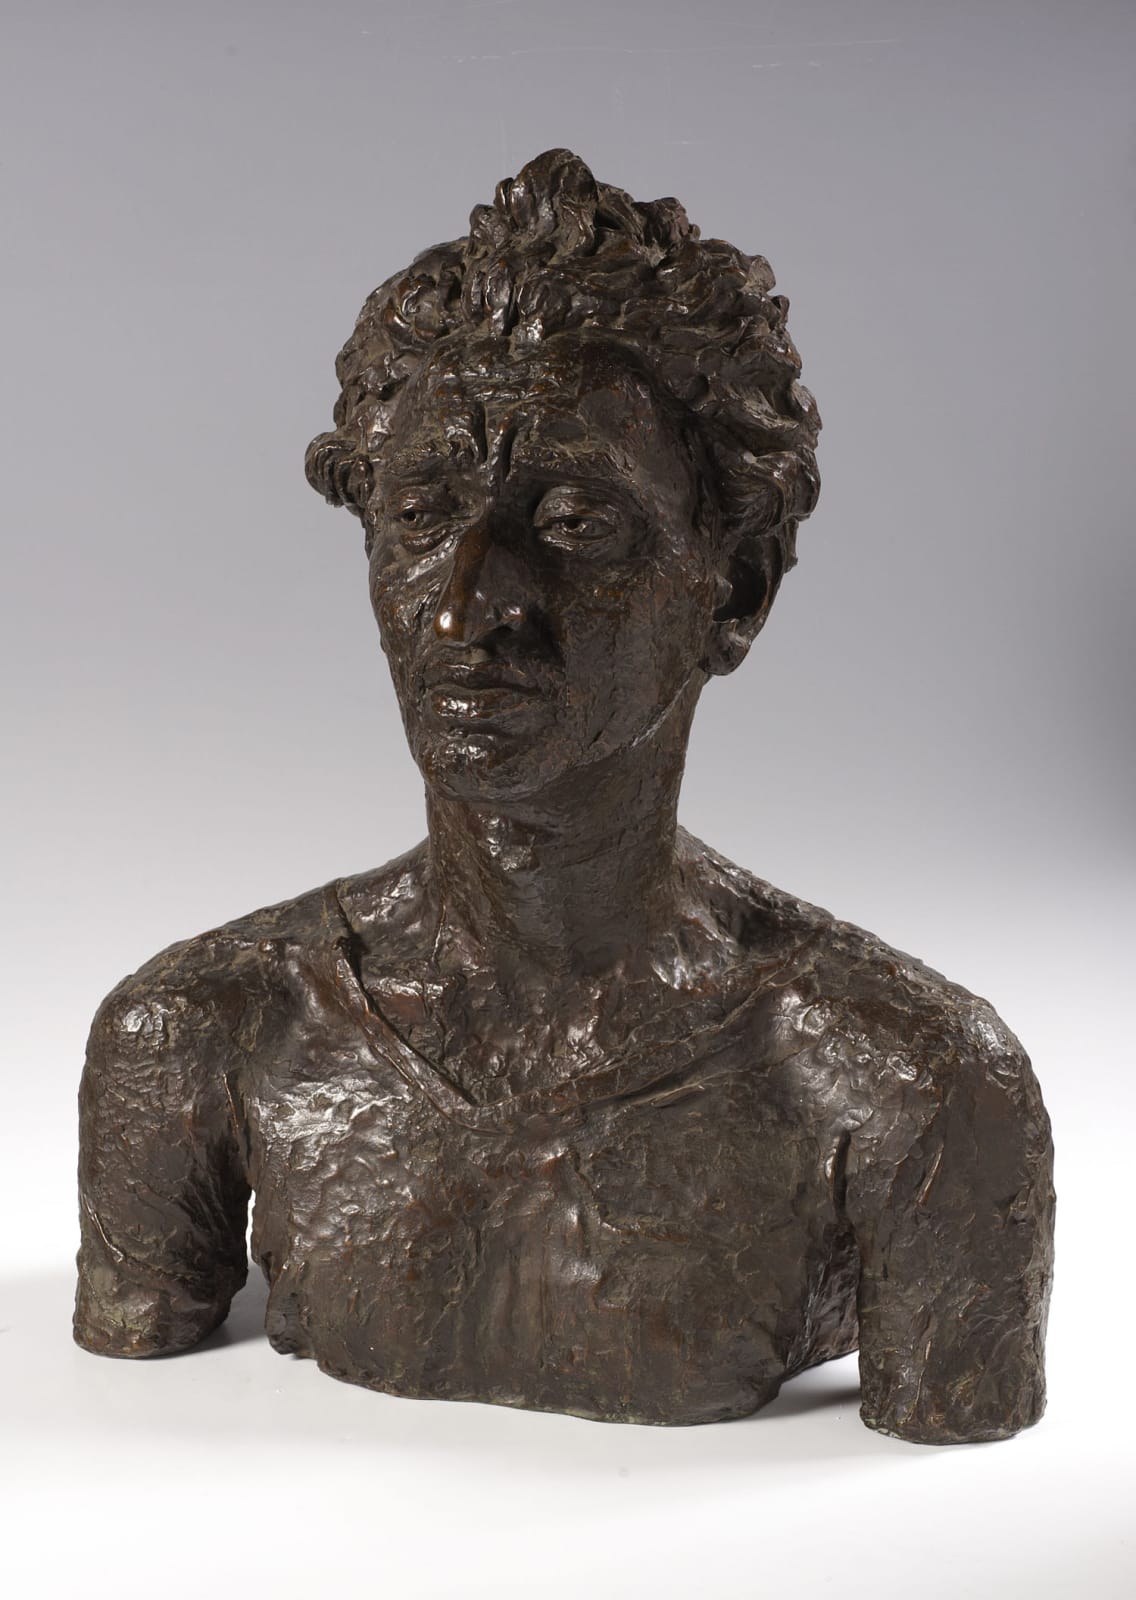 Jacob Epstein (1880-1959) Bust of Jacob Kramer 1921 Bronze 64 x 49 x 25 cm Ben Uri Collection © Jacob Epstein estate To see and discover more about this artist click here